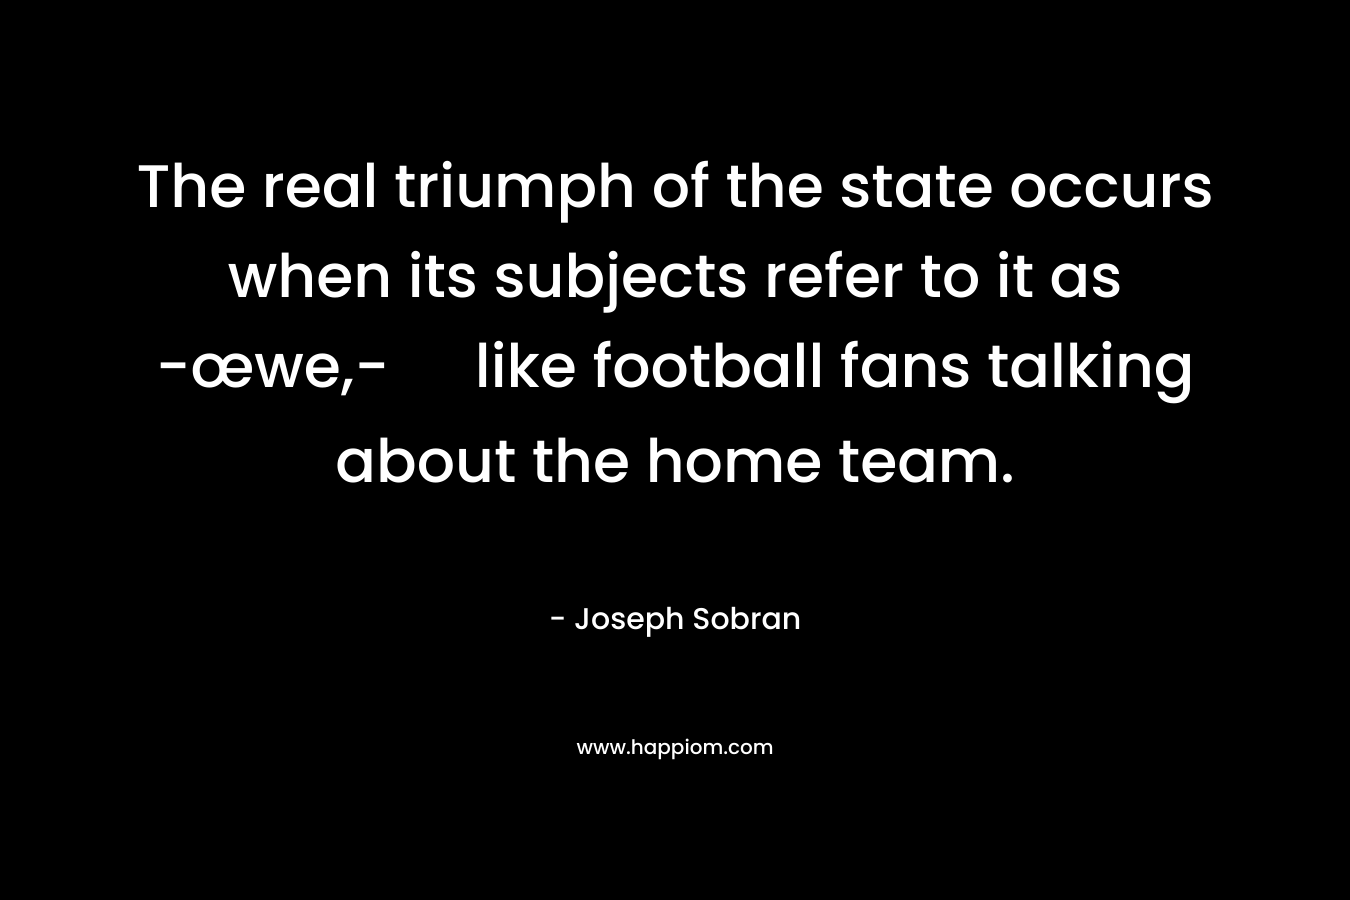 The real triumph of the state occurs when its subjects refer to it as -œwe,- like football fans talking about the home team. – Joseph Sobran